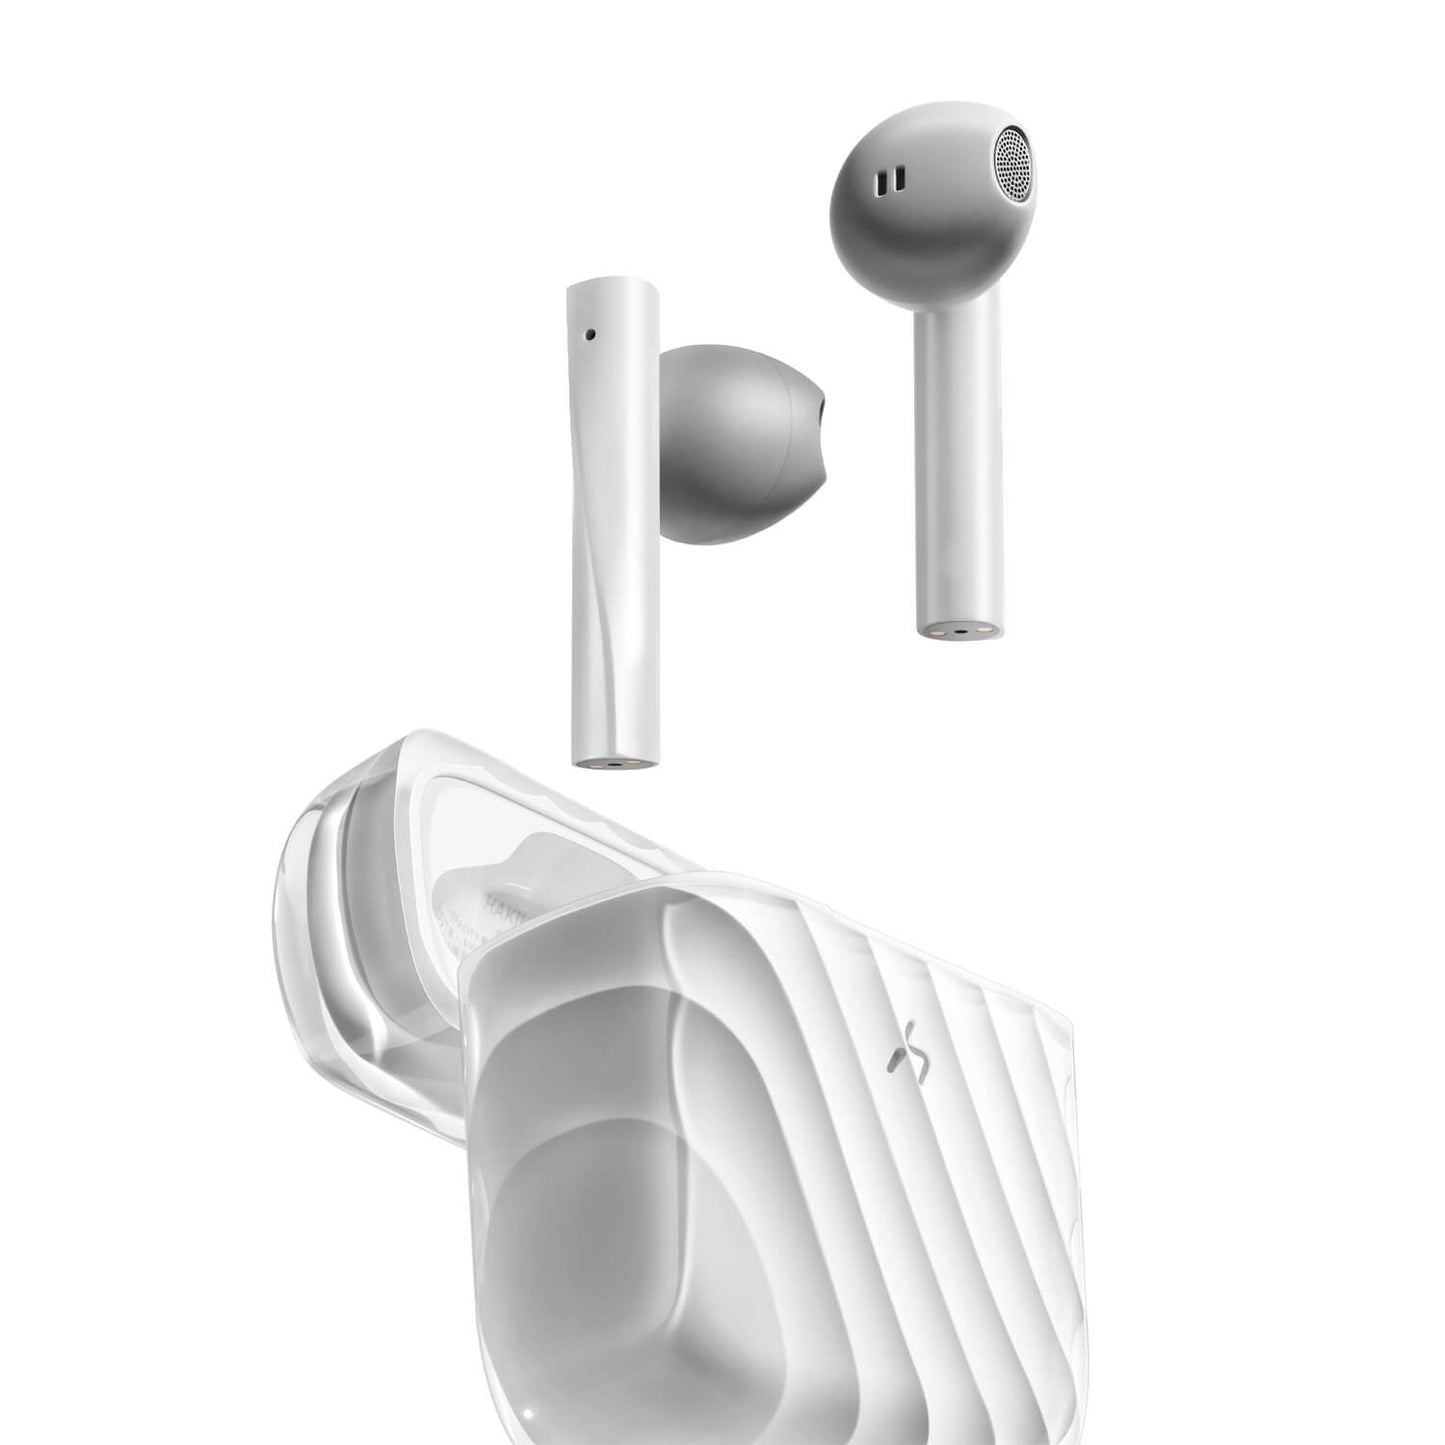 HAKII ICE Lite Low Latency Wireless Earbuds for Android & iPhone (White)